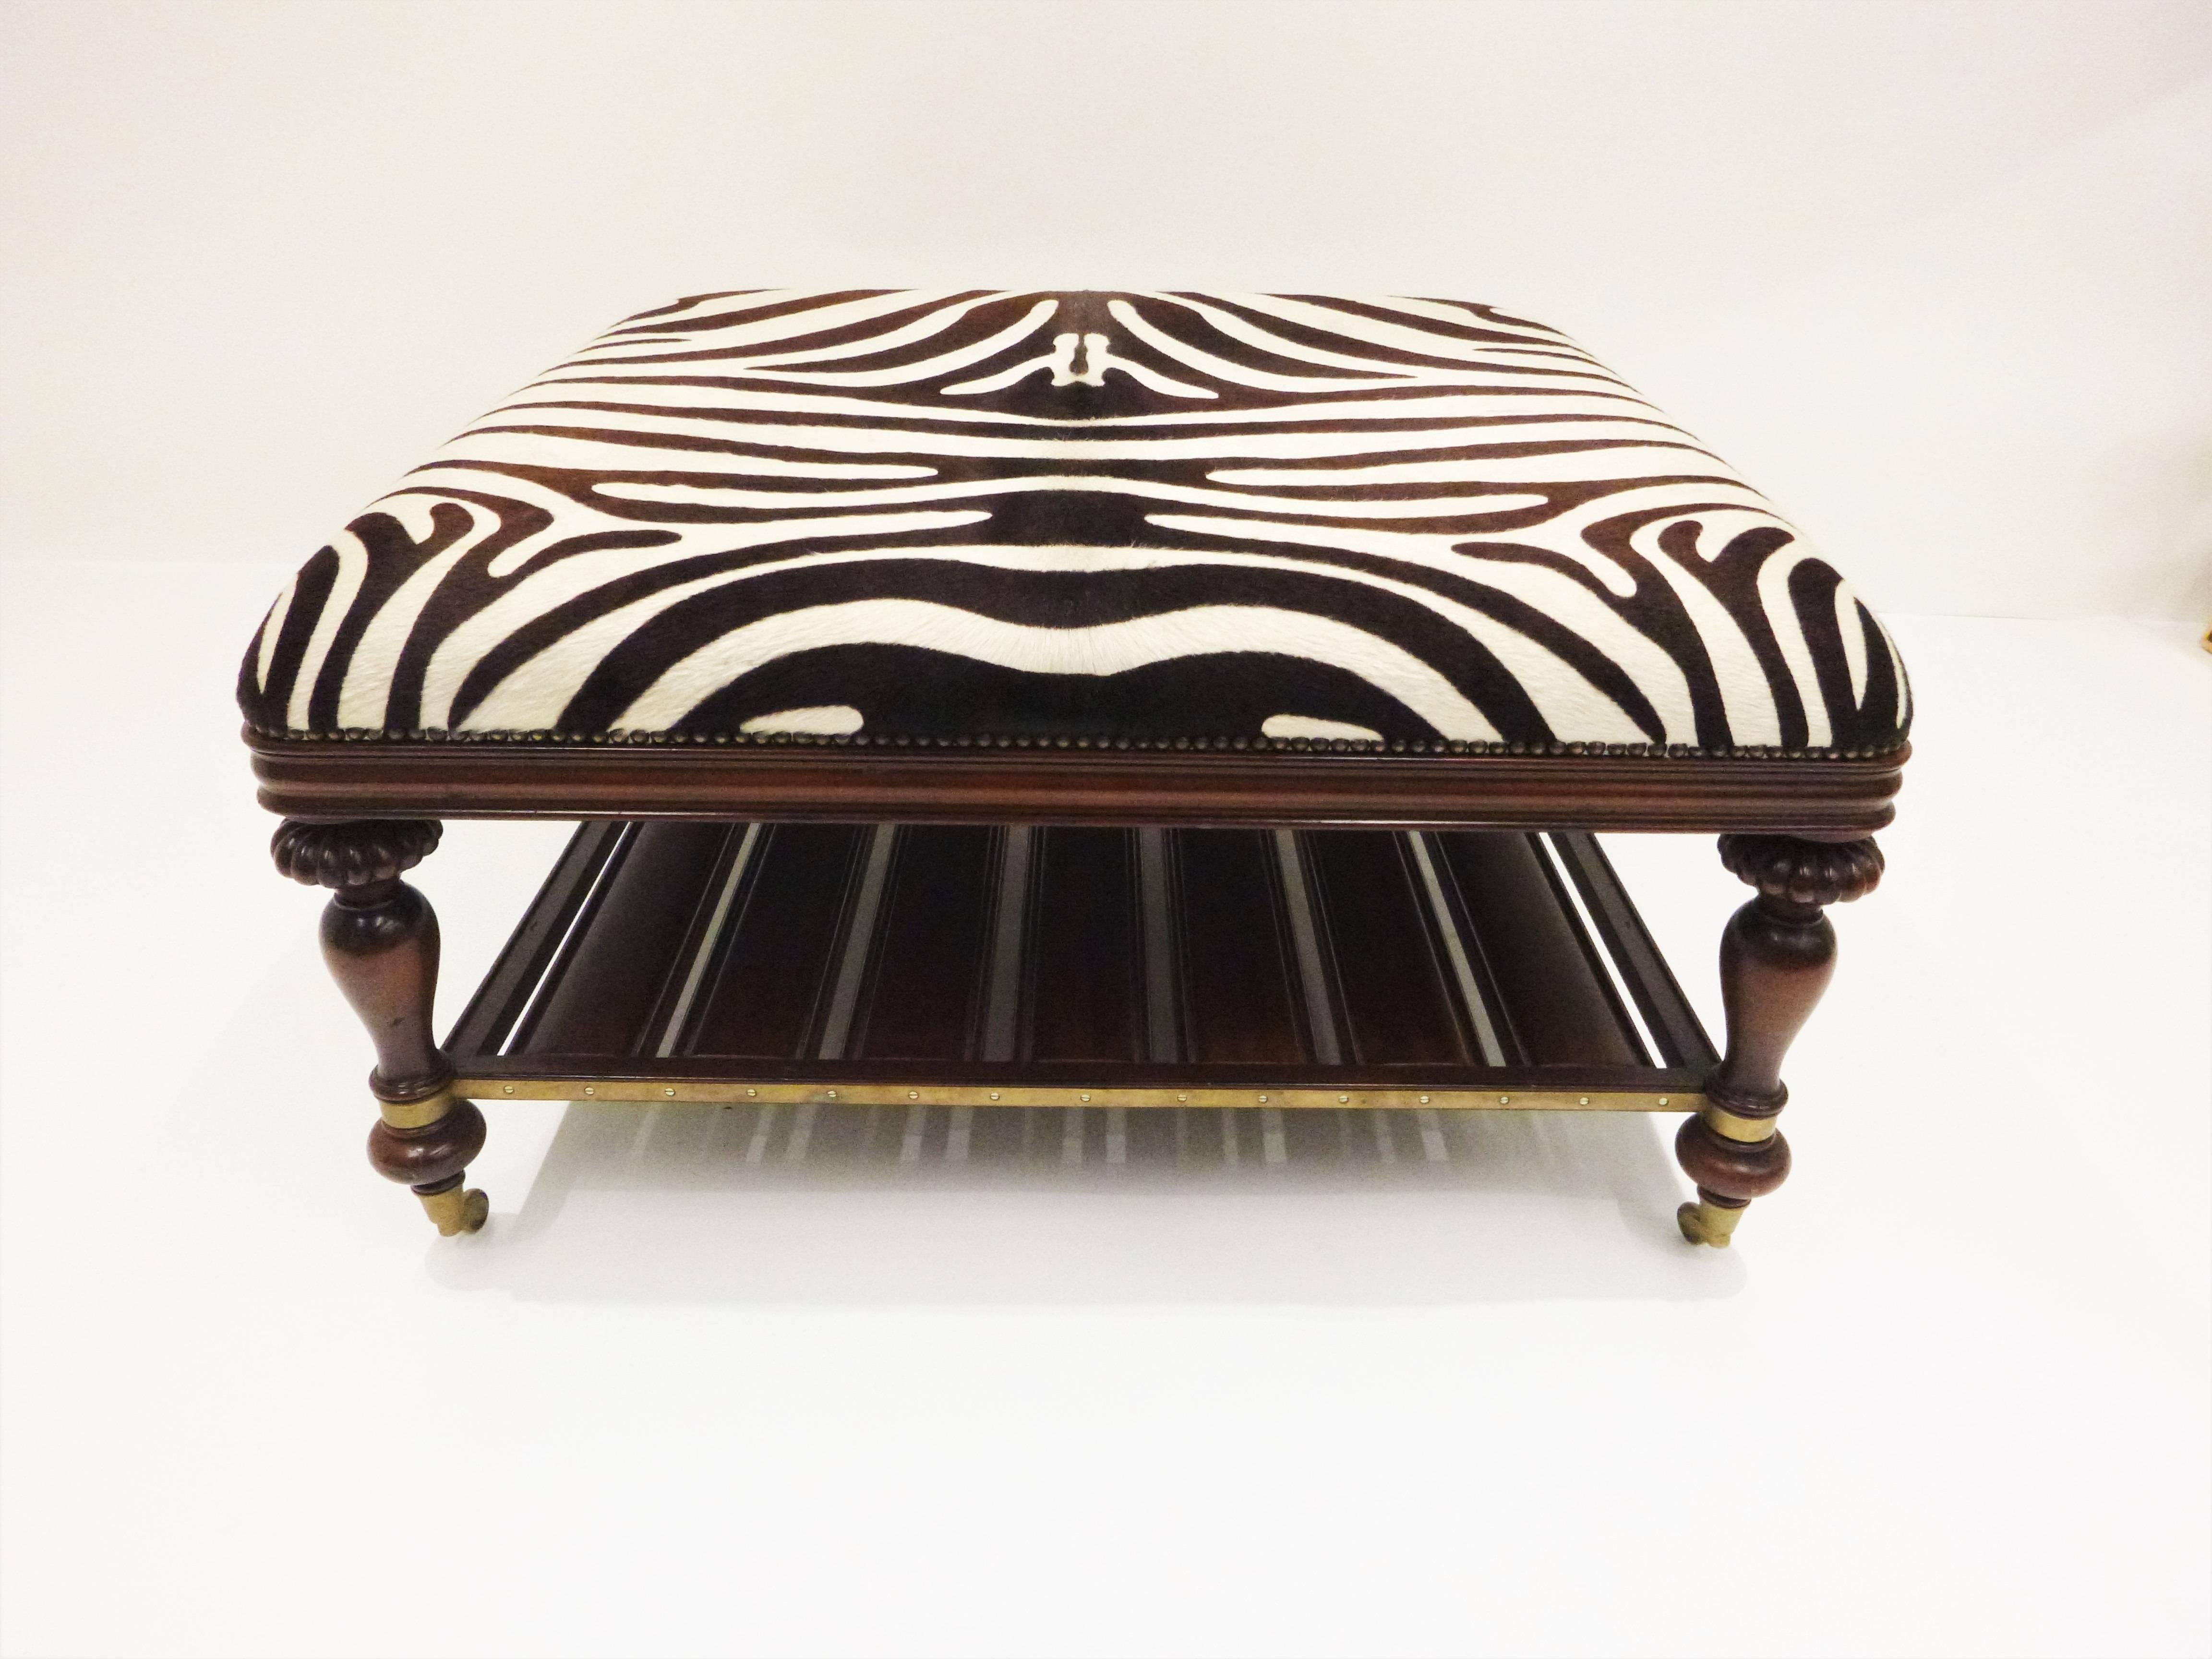 Classic design vintage zebra hide open style coffee or cocktail table. Mahogany framed, zebra hide trimmed in nailhead around all edges. The studding is achieved with close individual studs, each nail is individually hammered in by hand. Brass